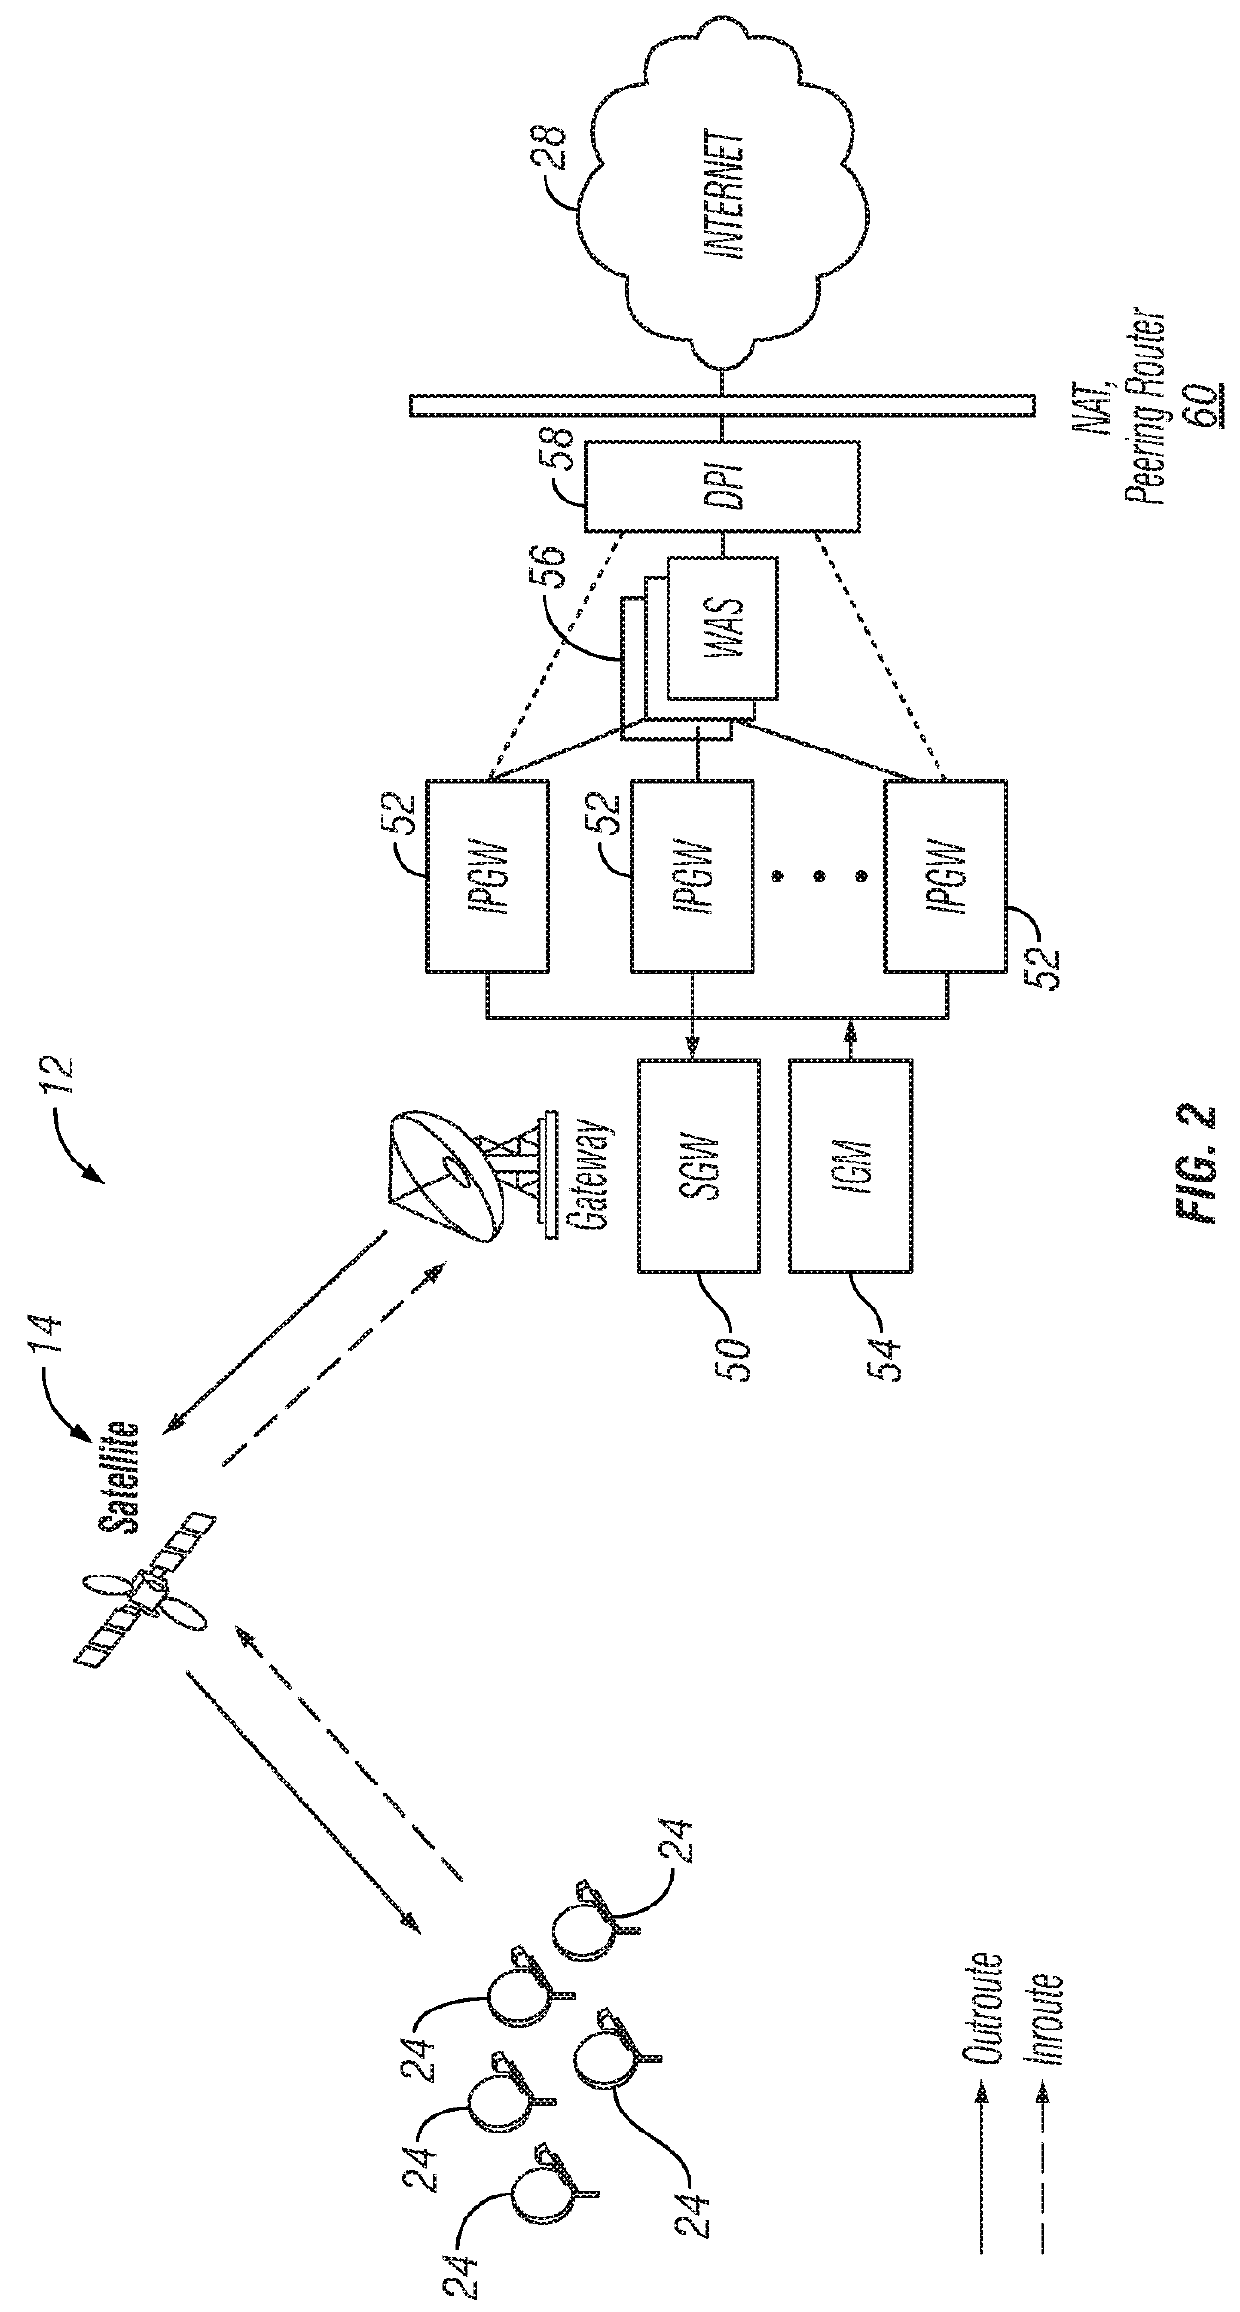 Data buffering control system and method for a communication network